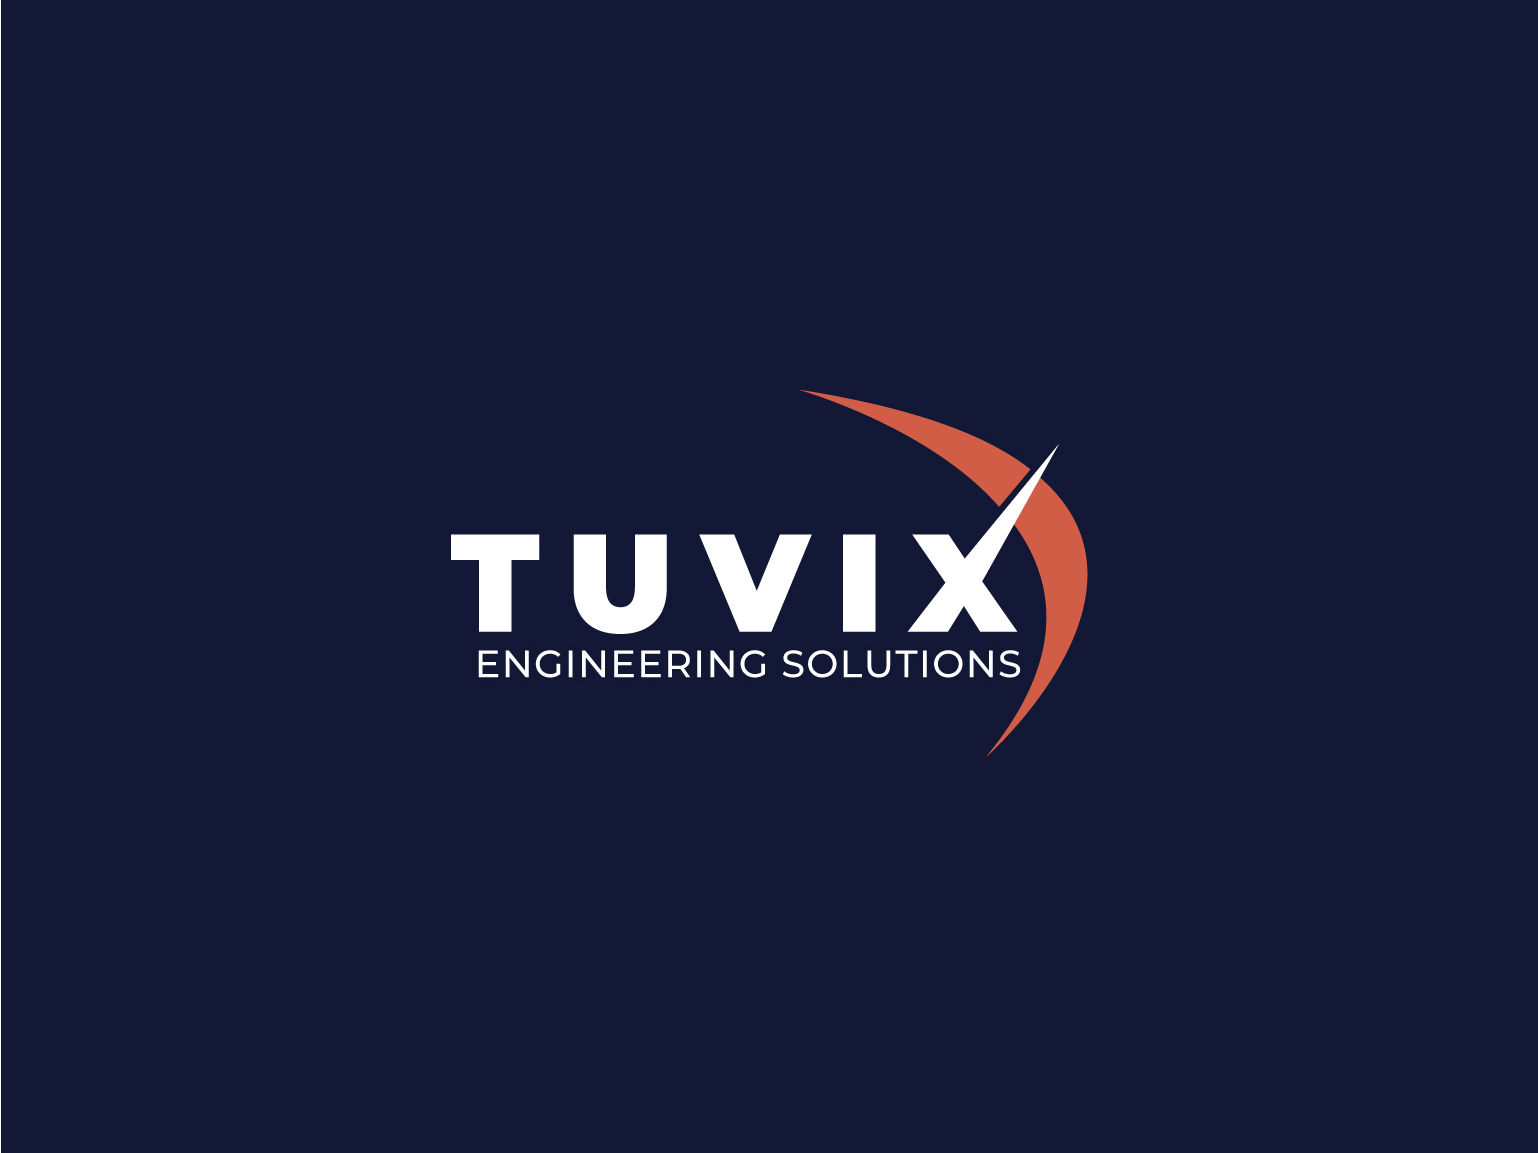 Tuvix Engineering Solutions Logo By Pranay Patel On Dribbble